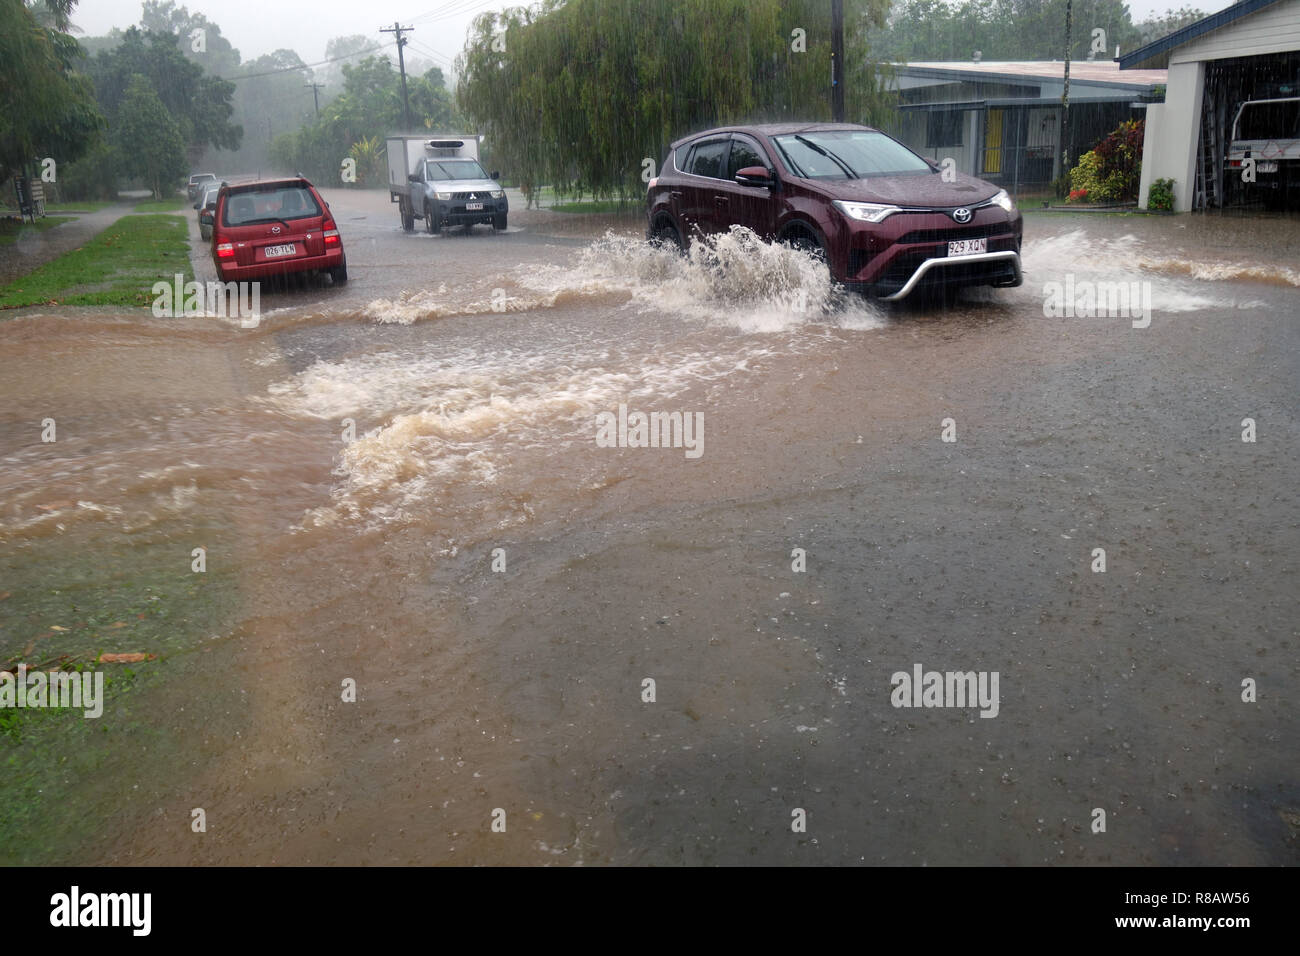 Cairns, Australia, 15 Dec 2018. First storms from Tropical Cyclone Owen have caused localised flash flooding in far north Queensland. Cars driving through floodwaters in the suburb of Edge Hill, Cairns, Queensland, Australia. Credit: Suzanne Long/Alamy Live News Stock Photo